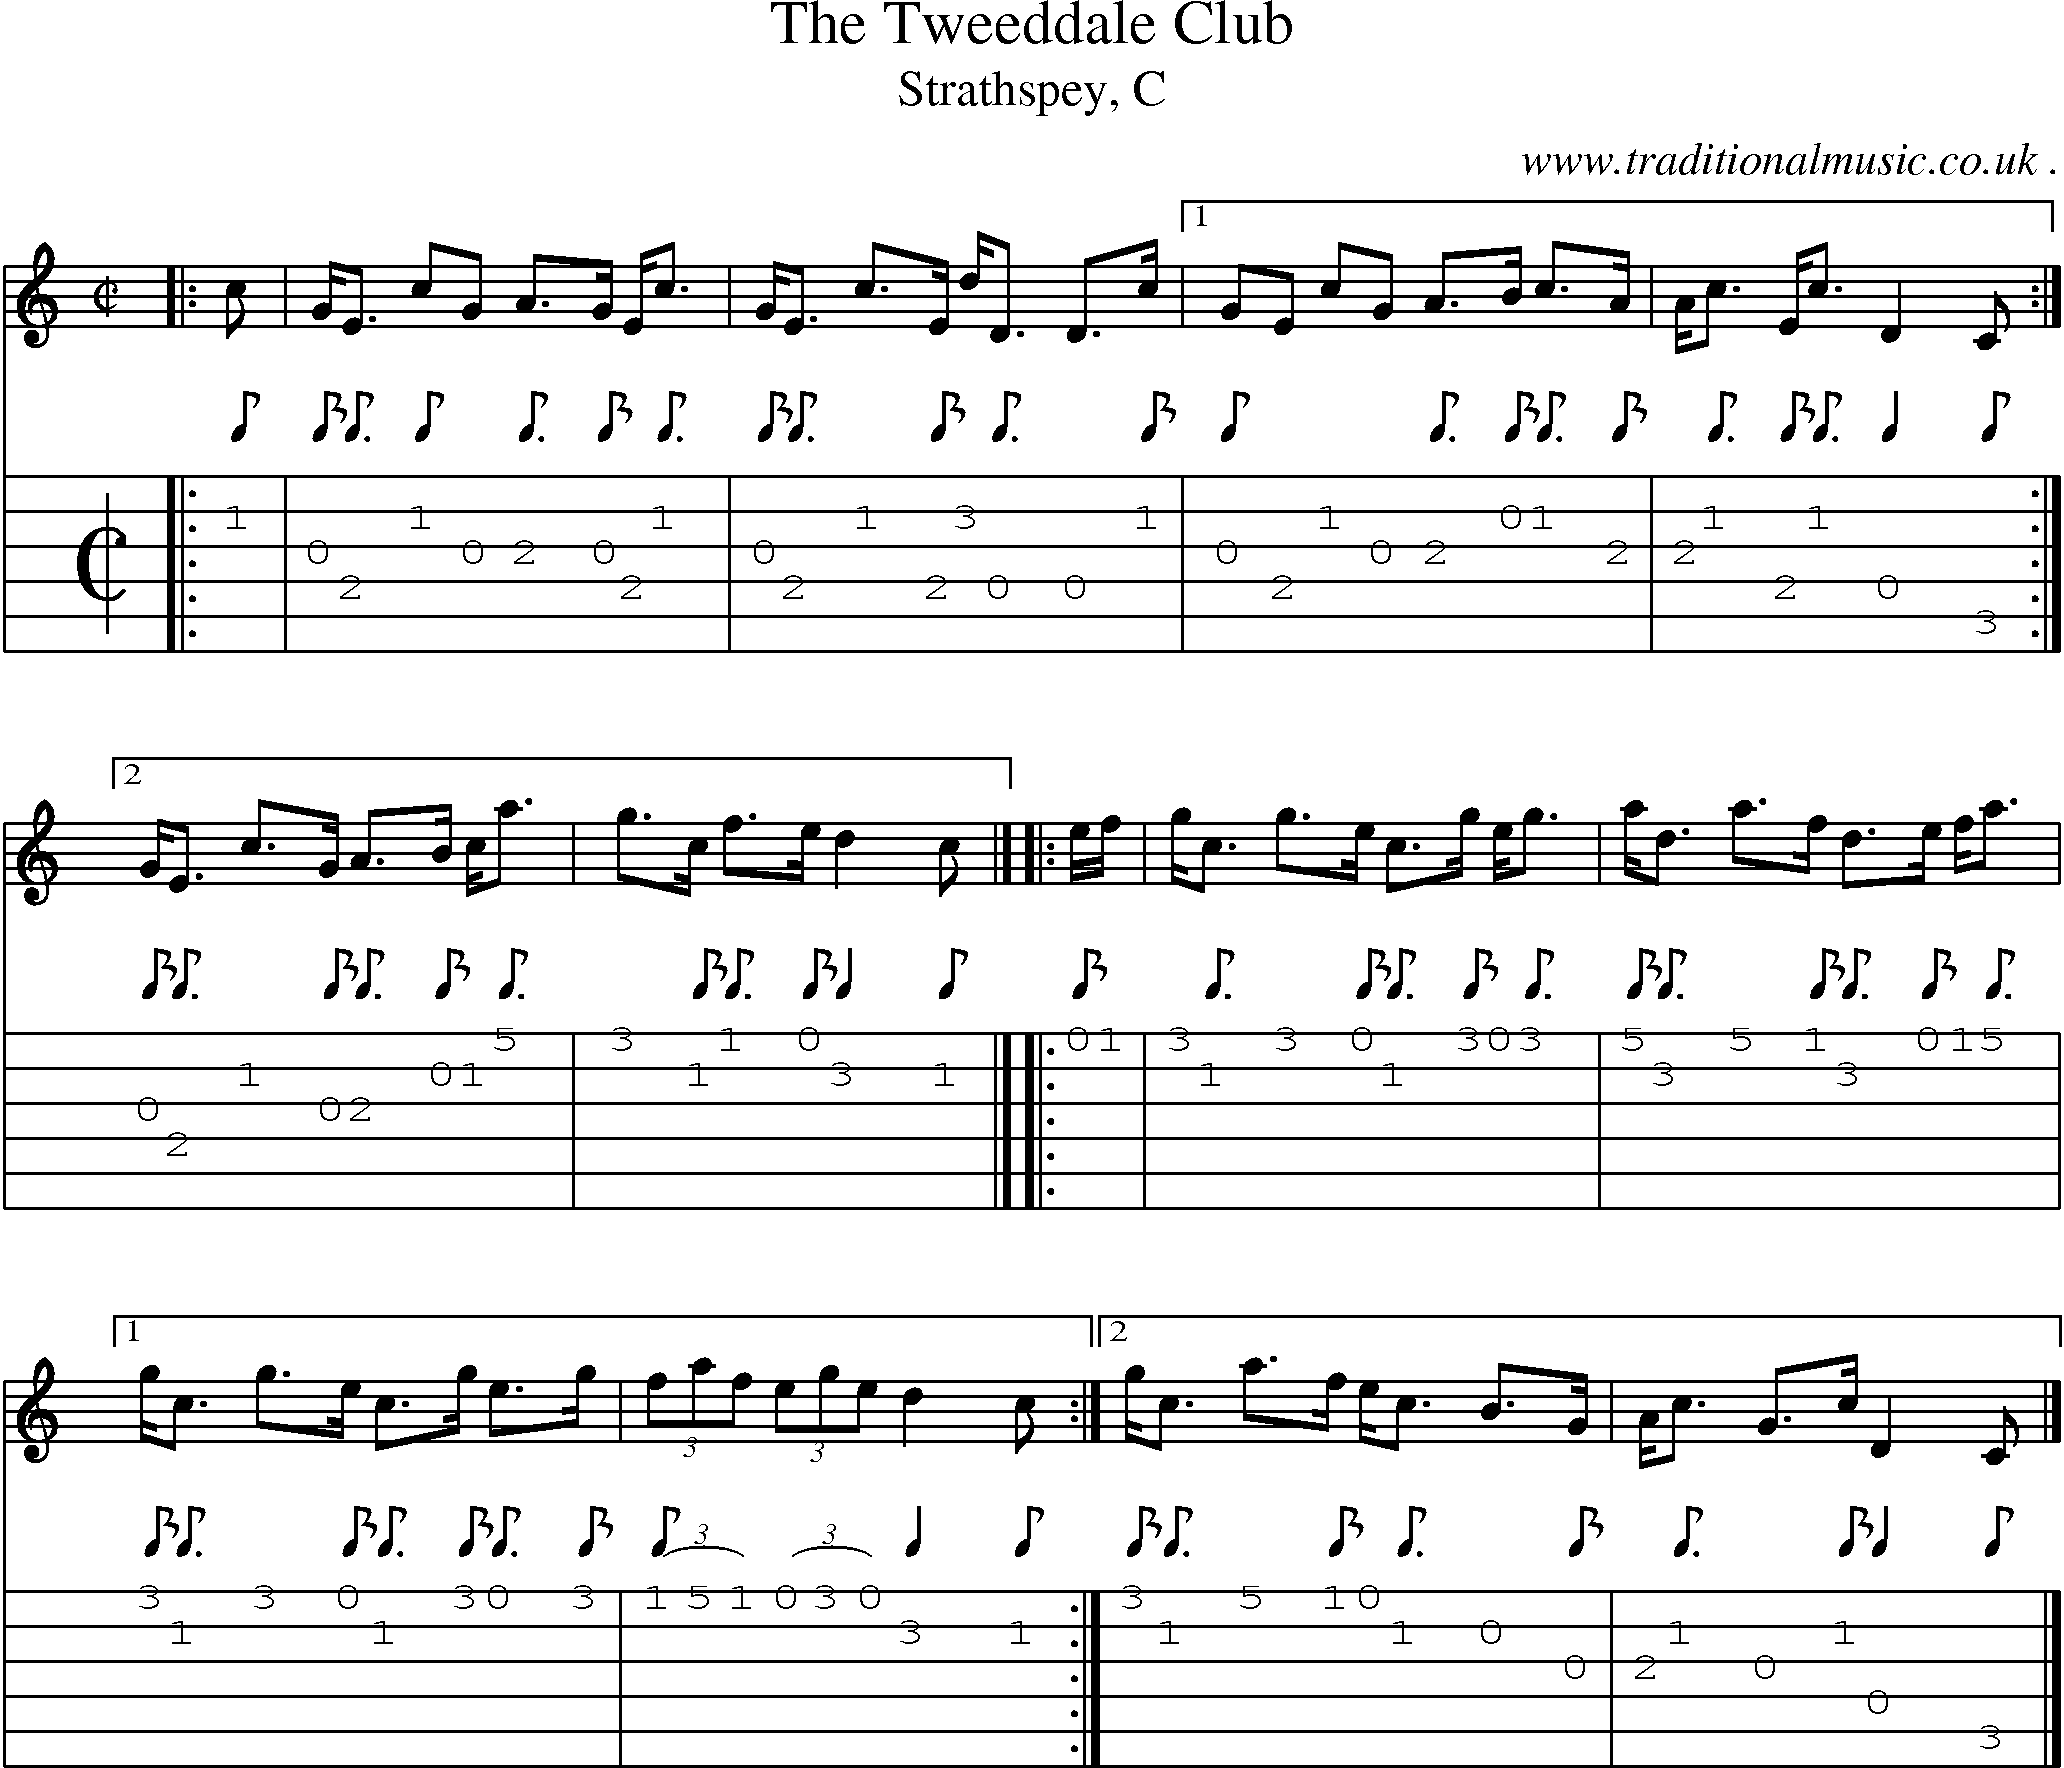 Sheet-music  score, Chords and Guitar Tabs for The Tweeddale Club